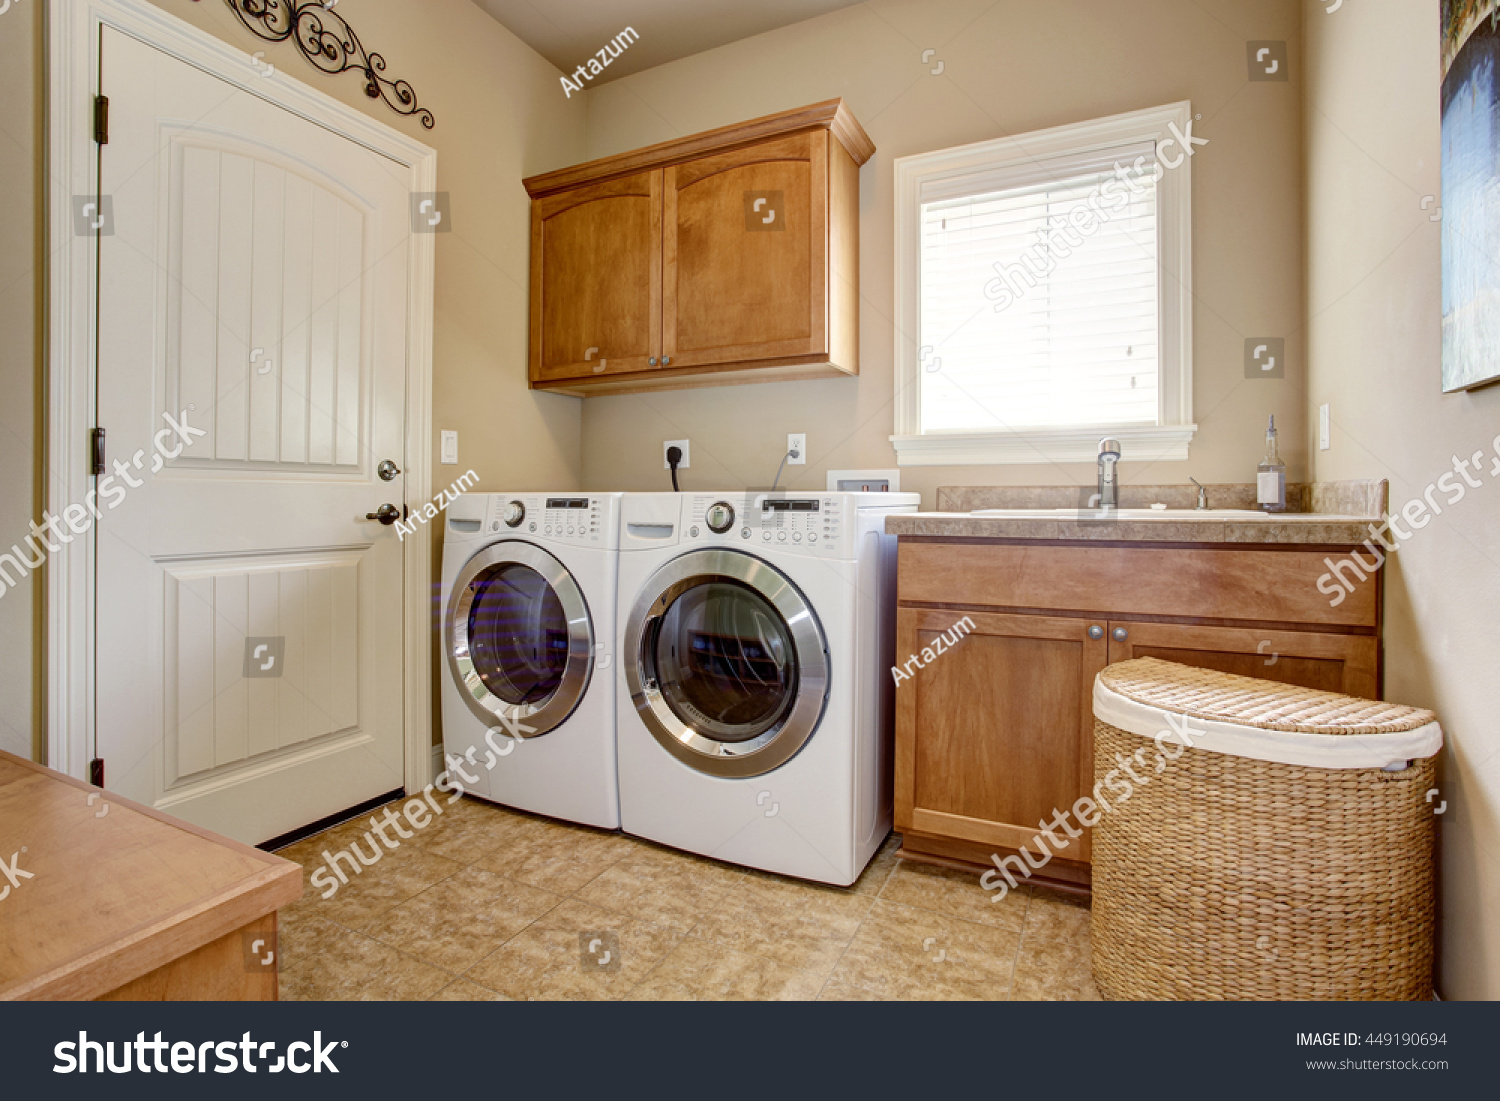 Laundry Room Washer Dryer Wooden Cabinets Stock Photo Edit Now